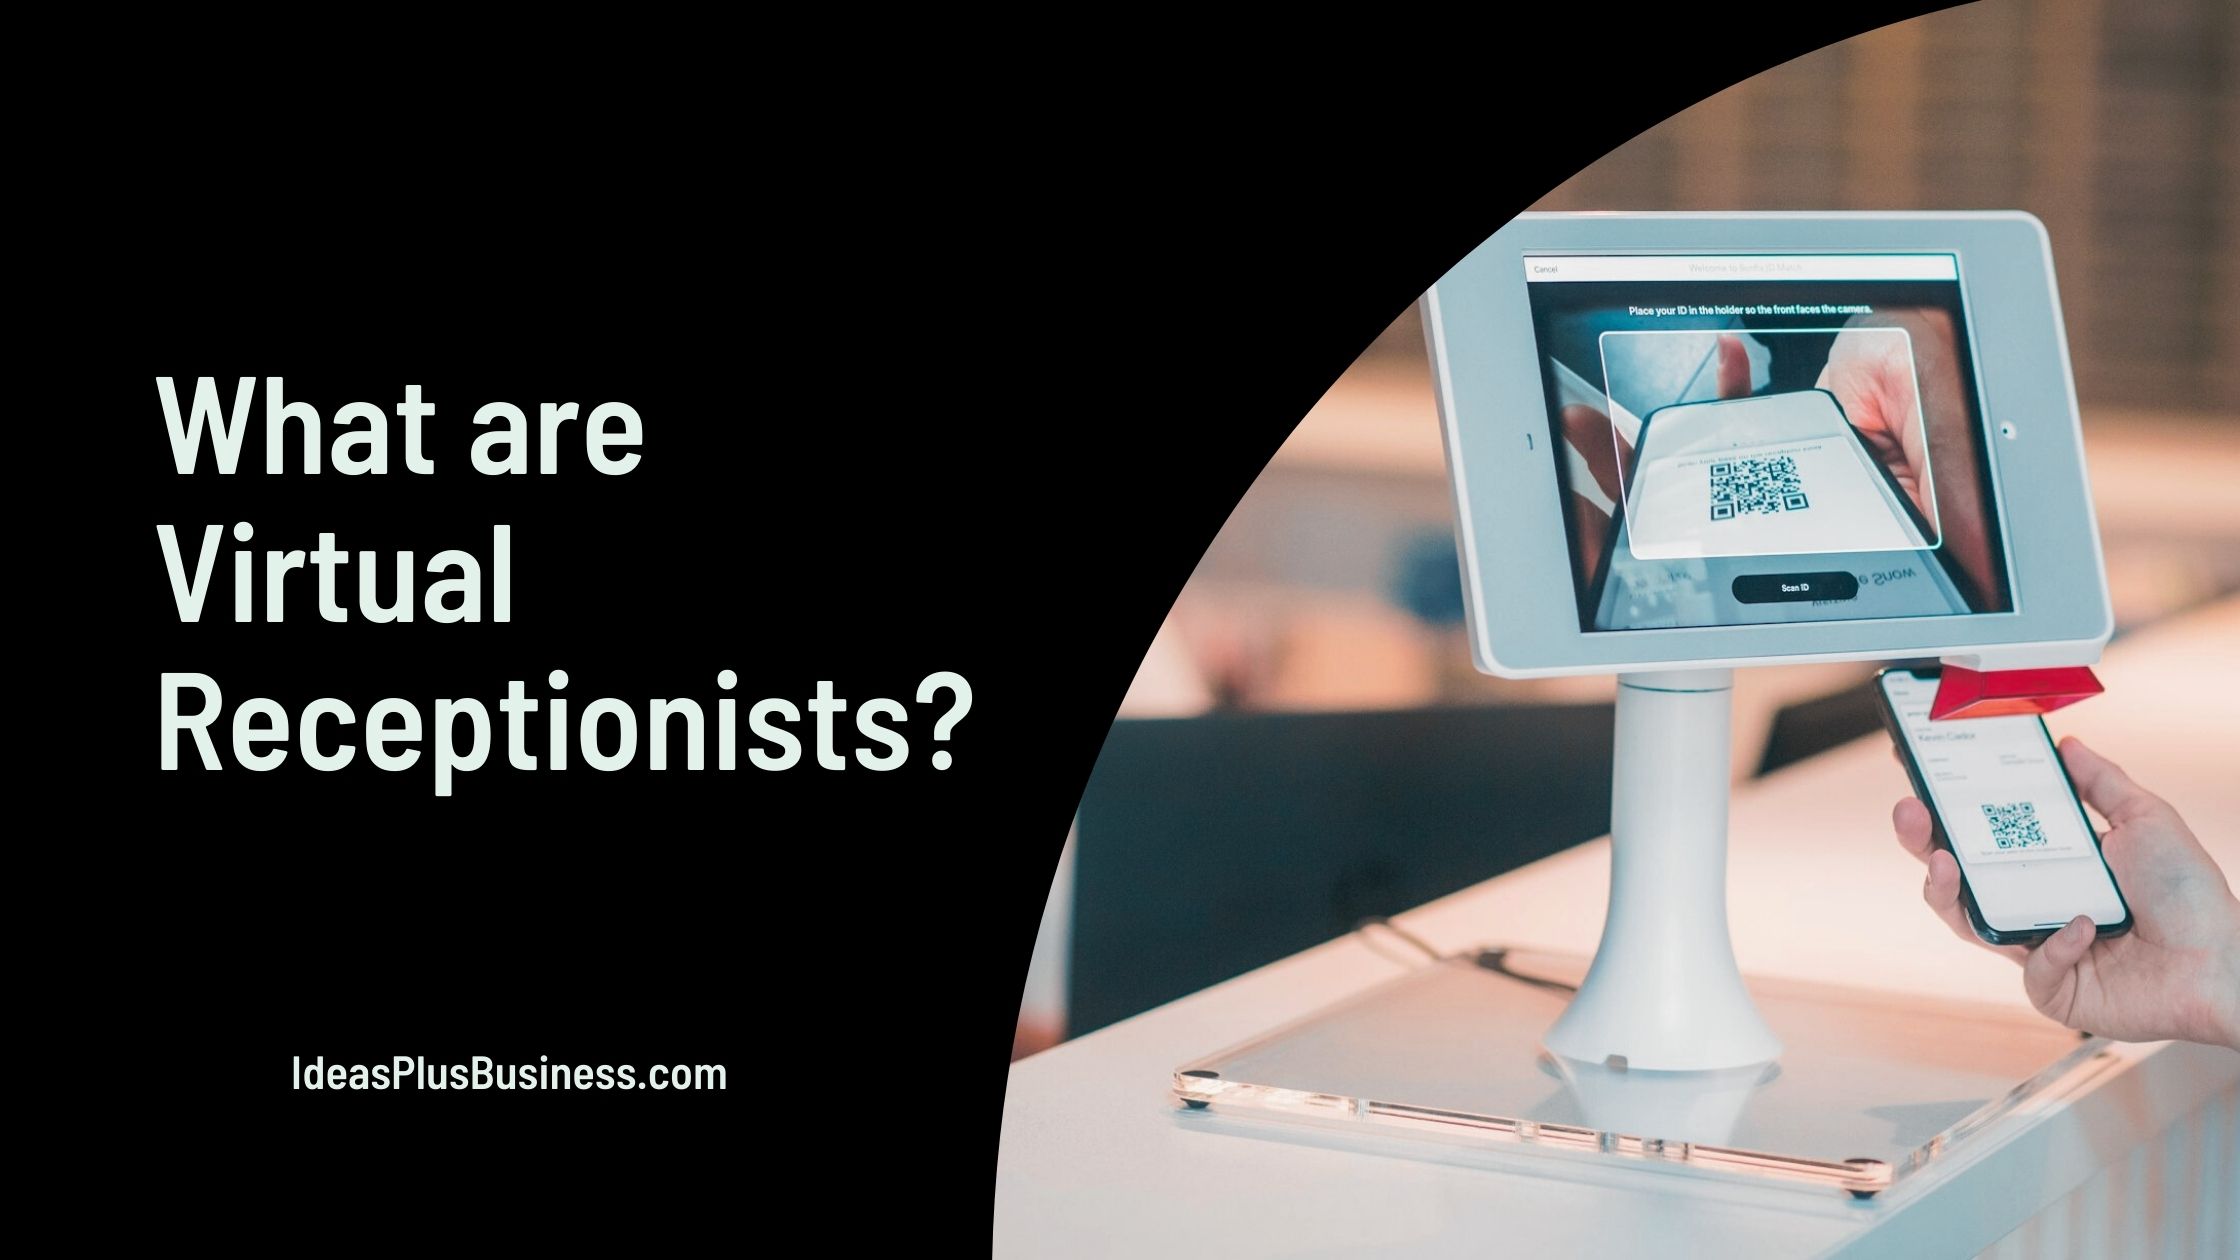 What are Virtual Receptionists?